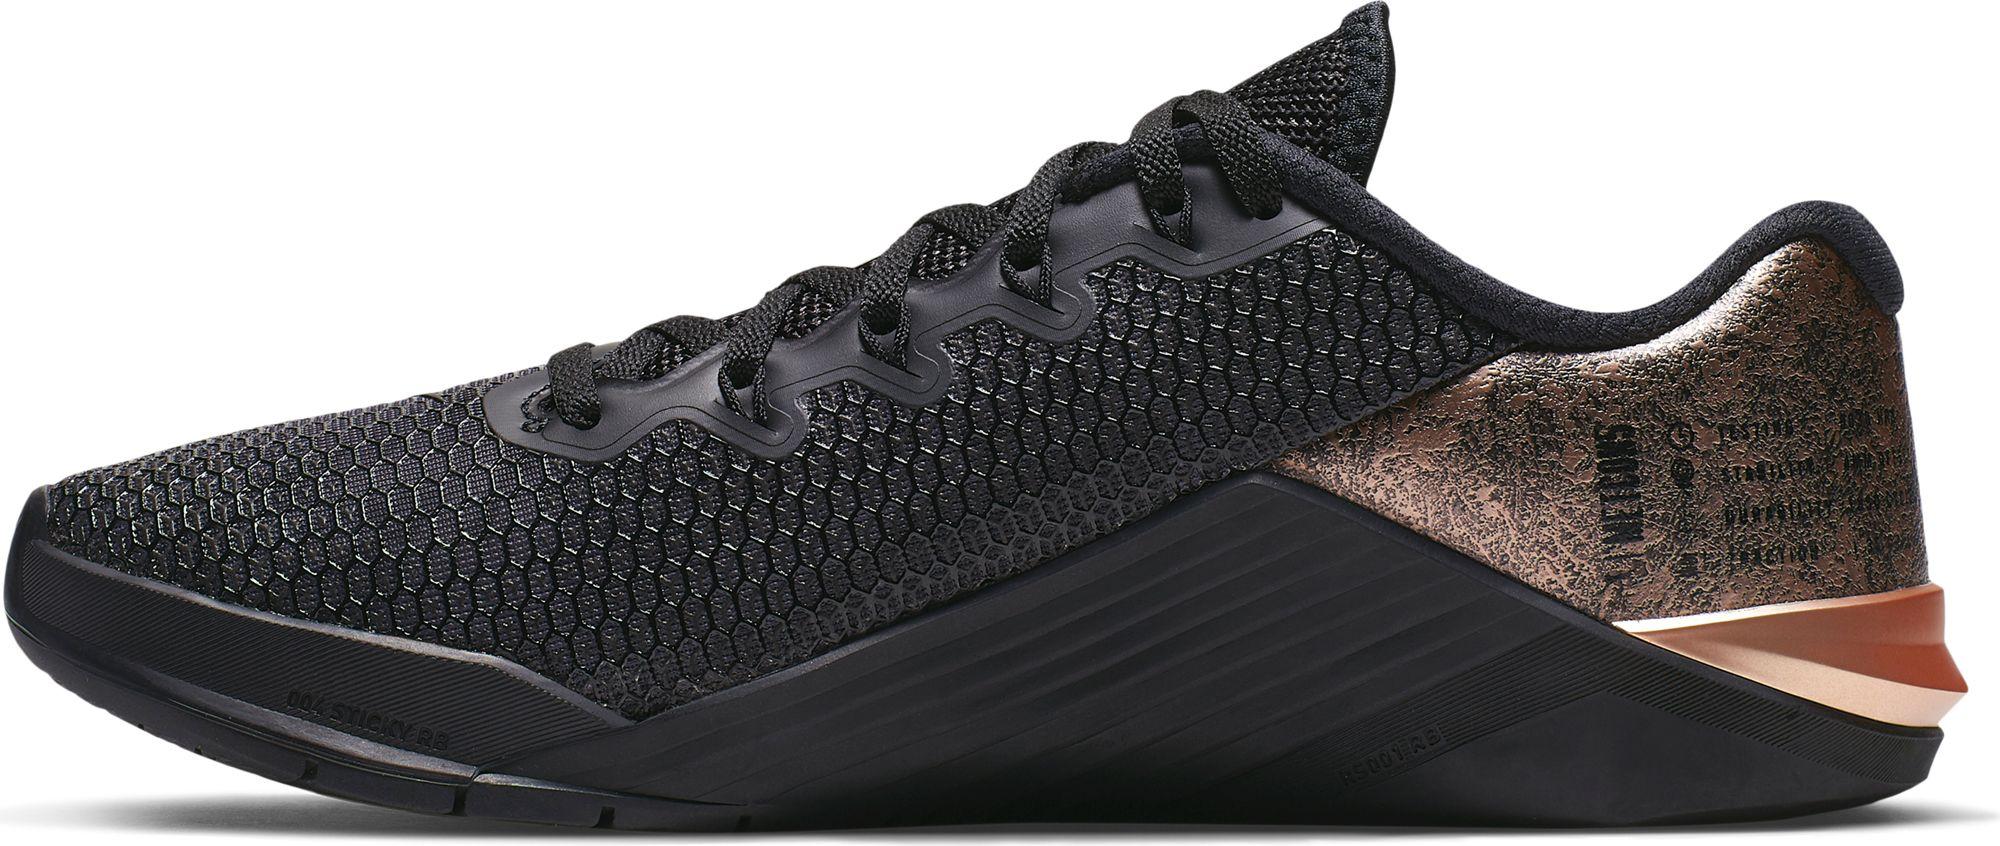 Nike Metcon 5 Black X Rose Gold Training Shoes | Lyst